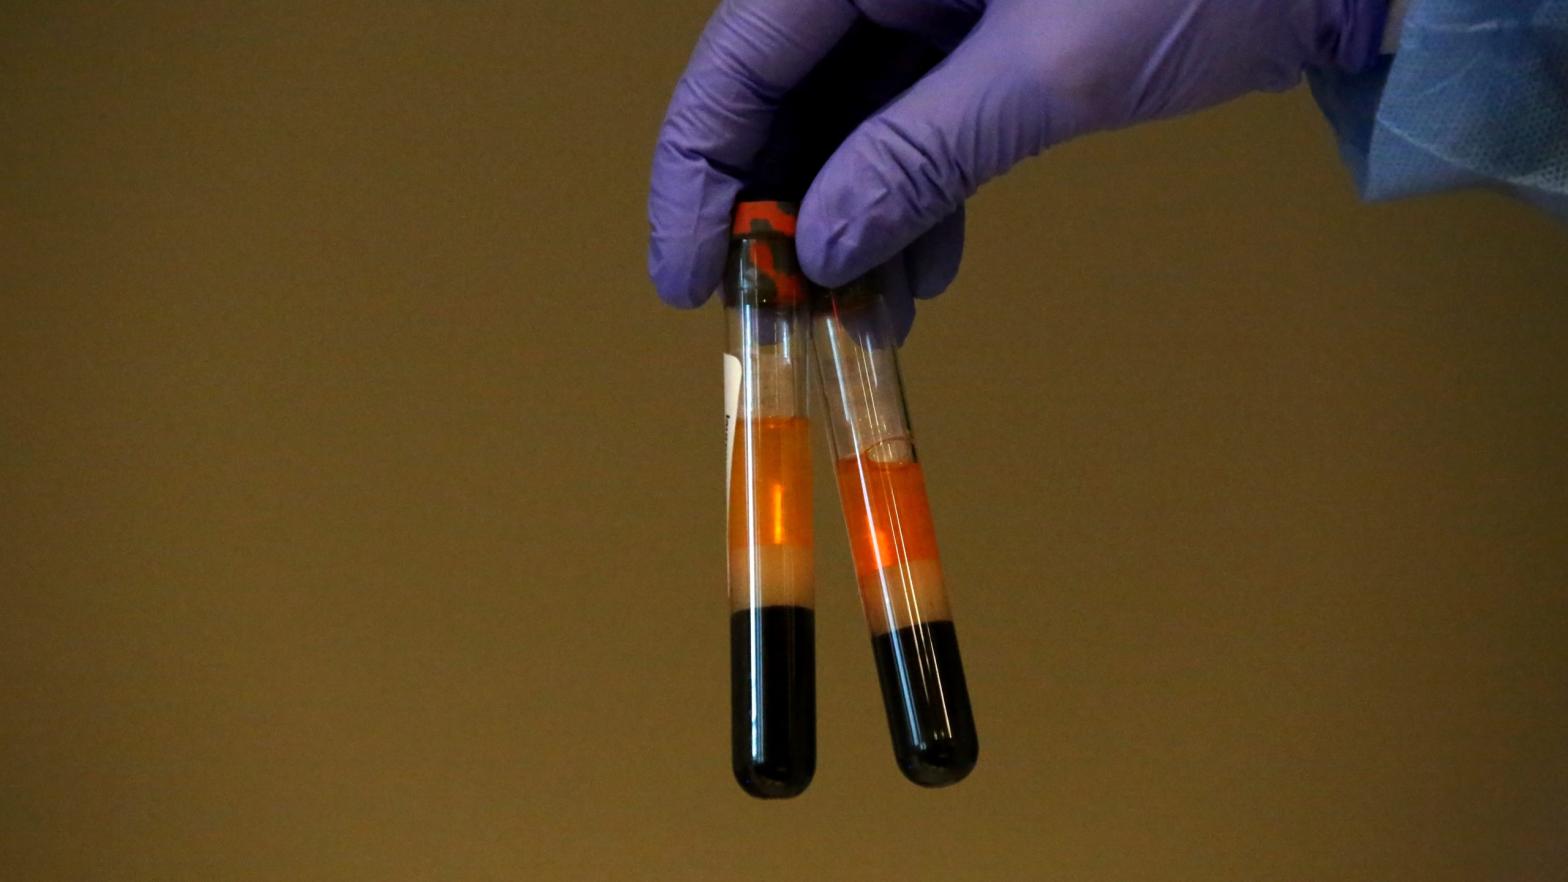 Patient samples to be tested for coronavirus antibodies. (Photo: Yana Paskova, Getty Images)